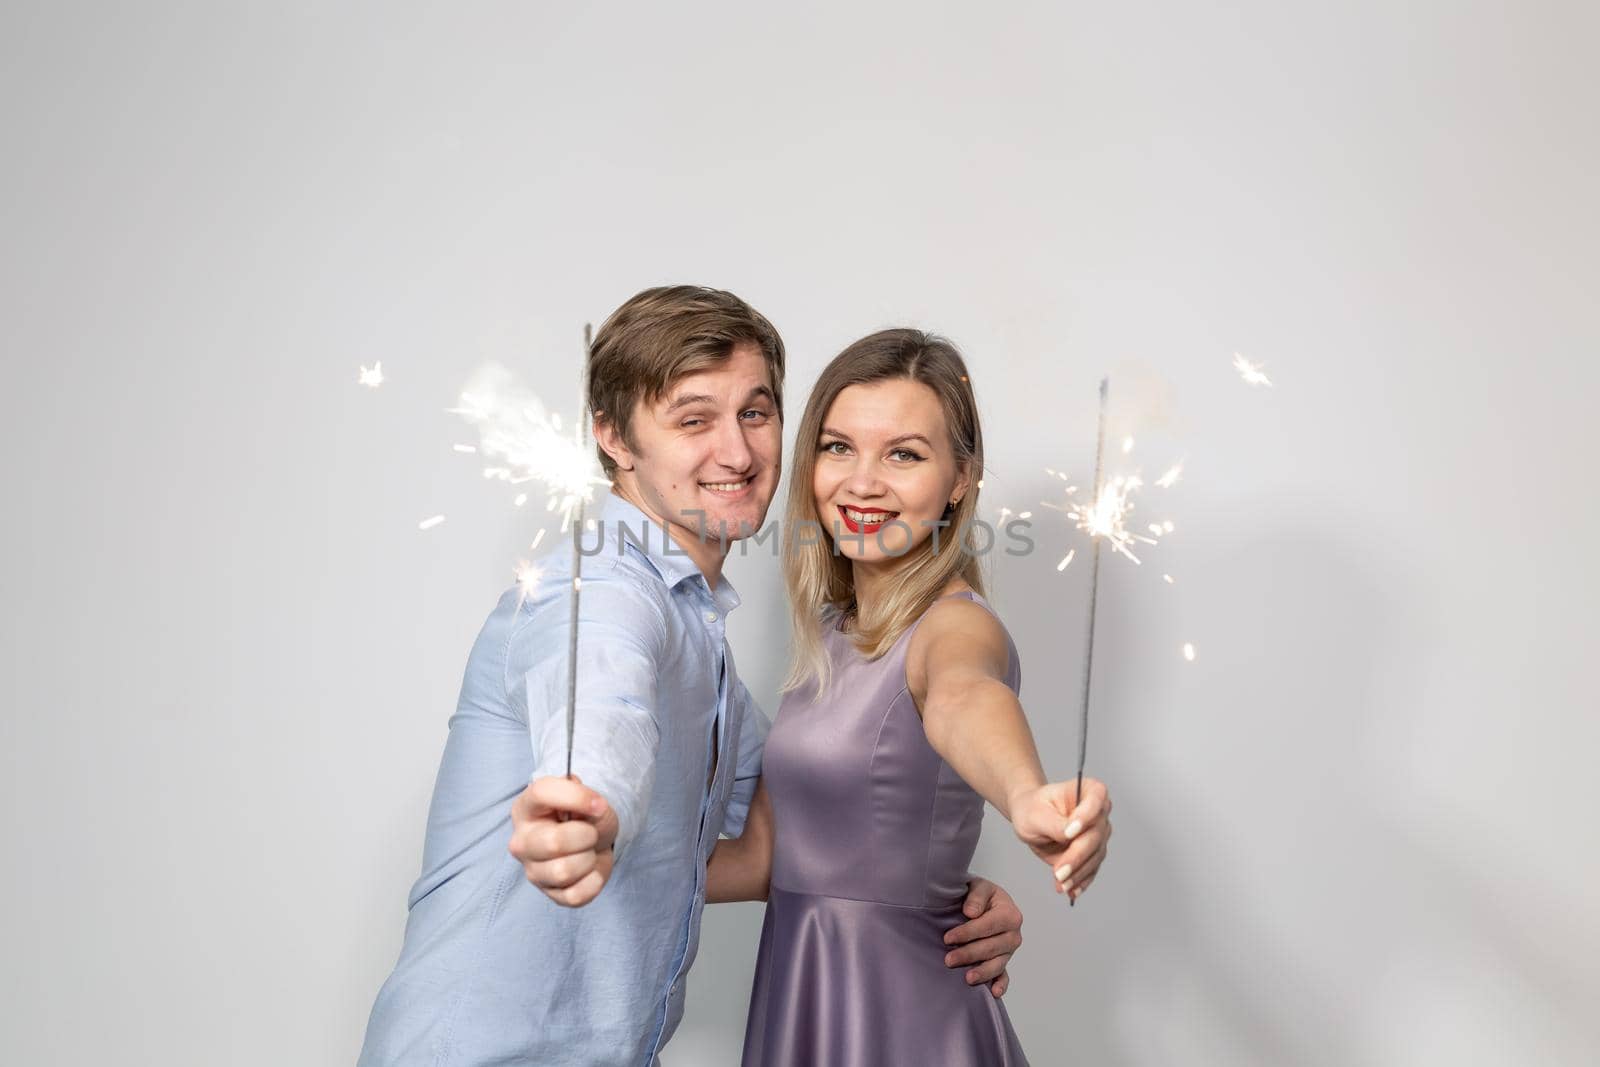 Party, celebration, event and holidays concept - man dressed in blue shirt and woman dressed in purple dress hold a firework stick.